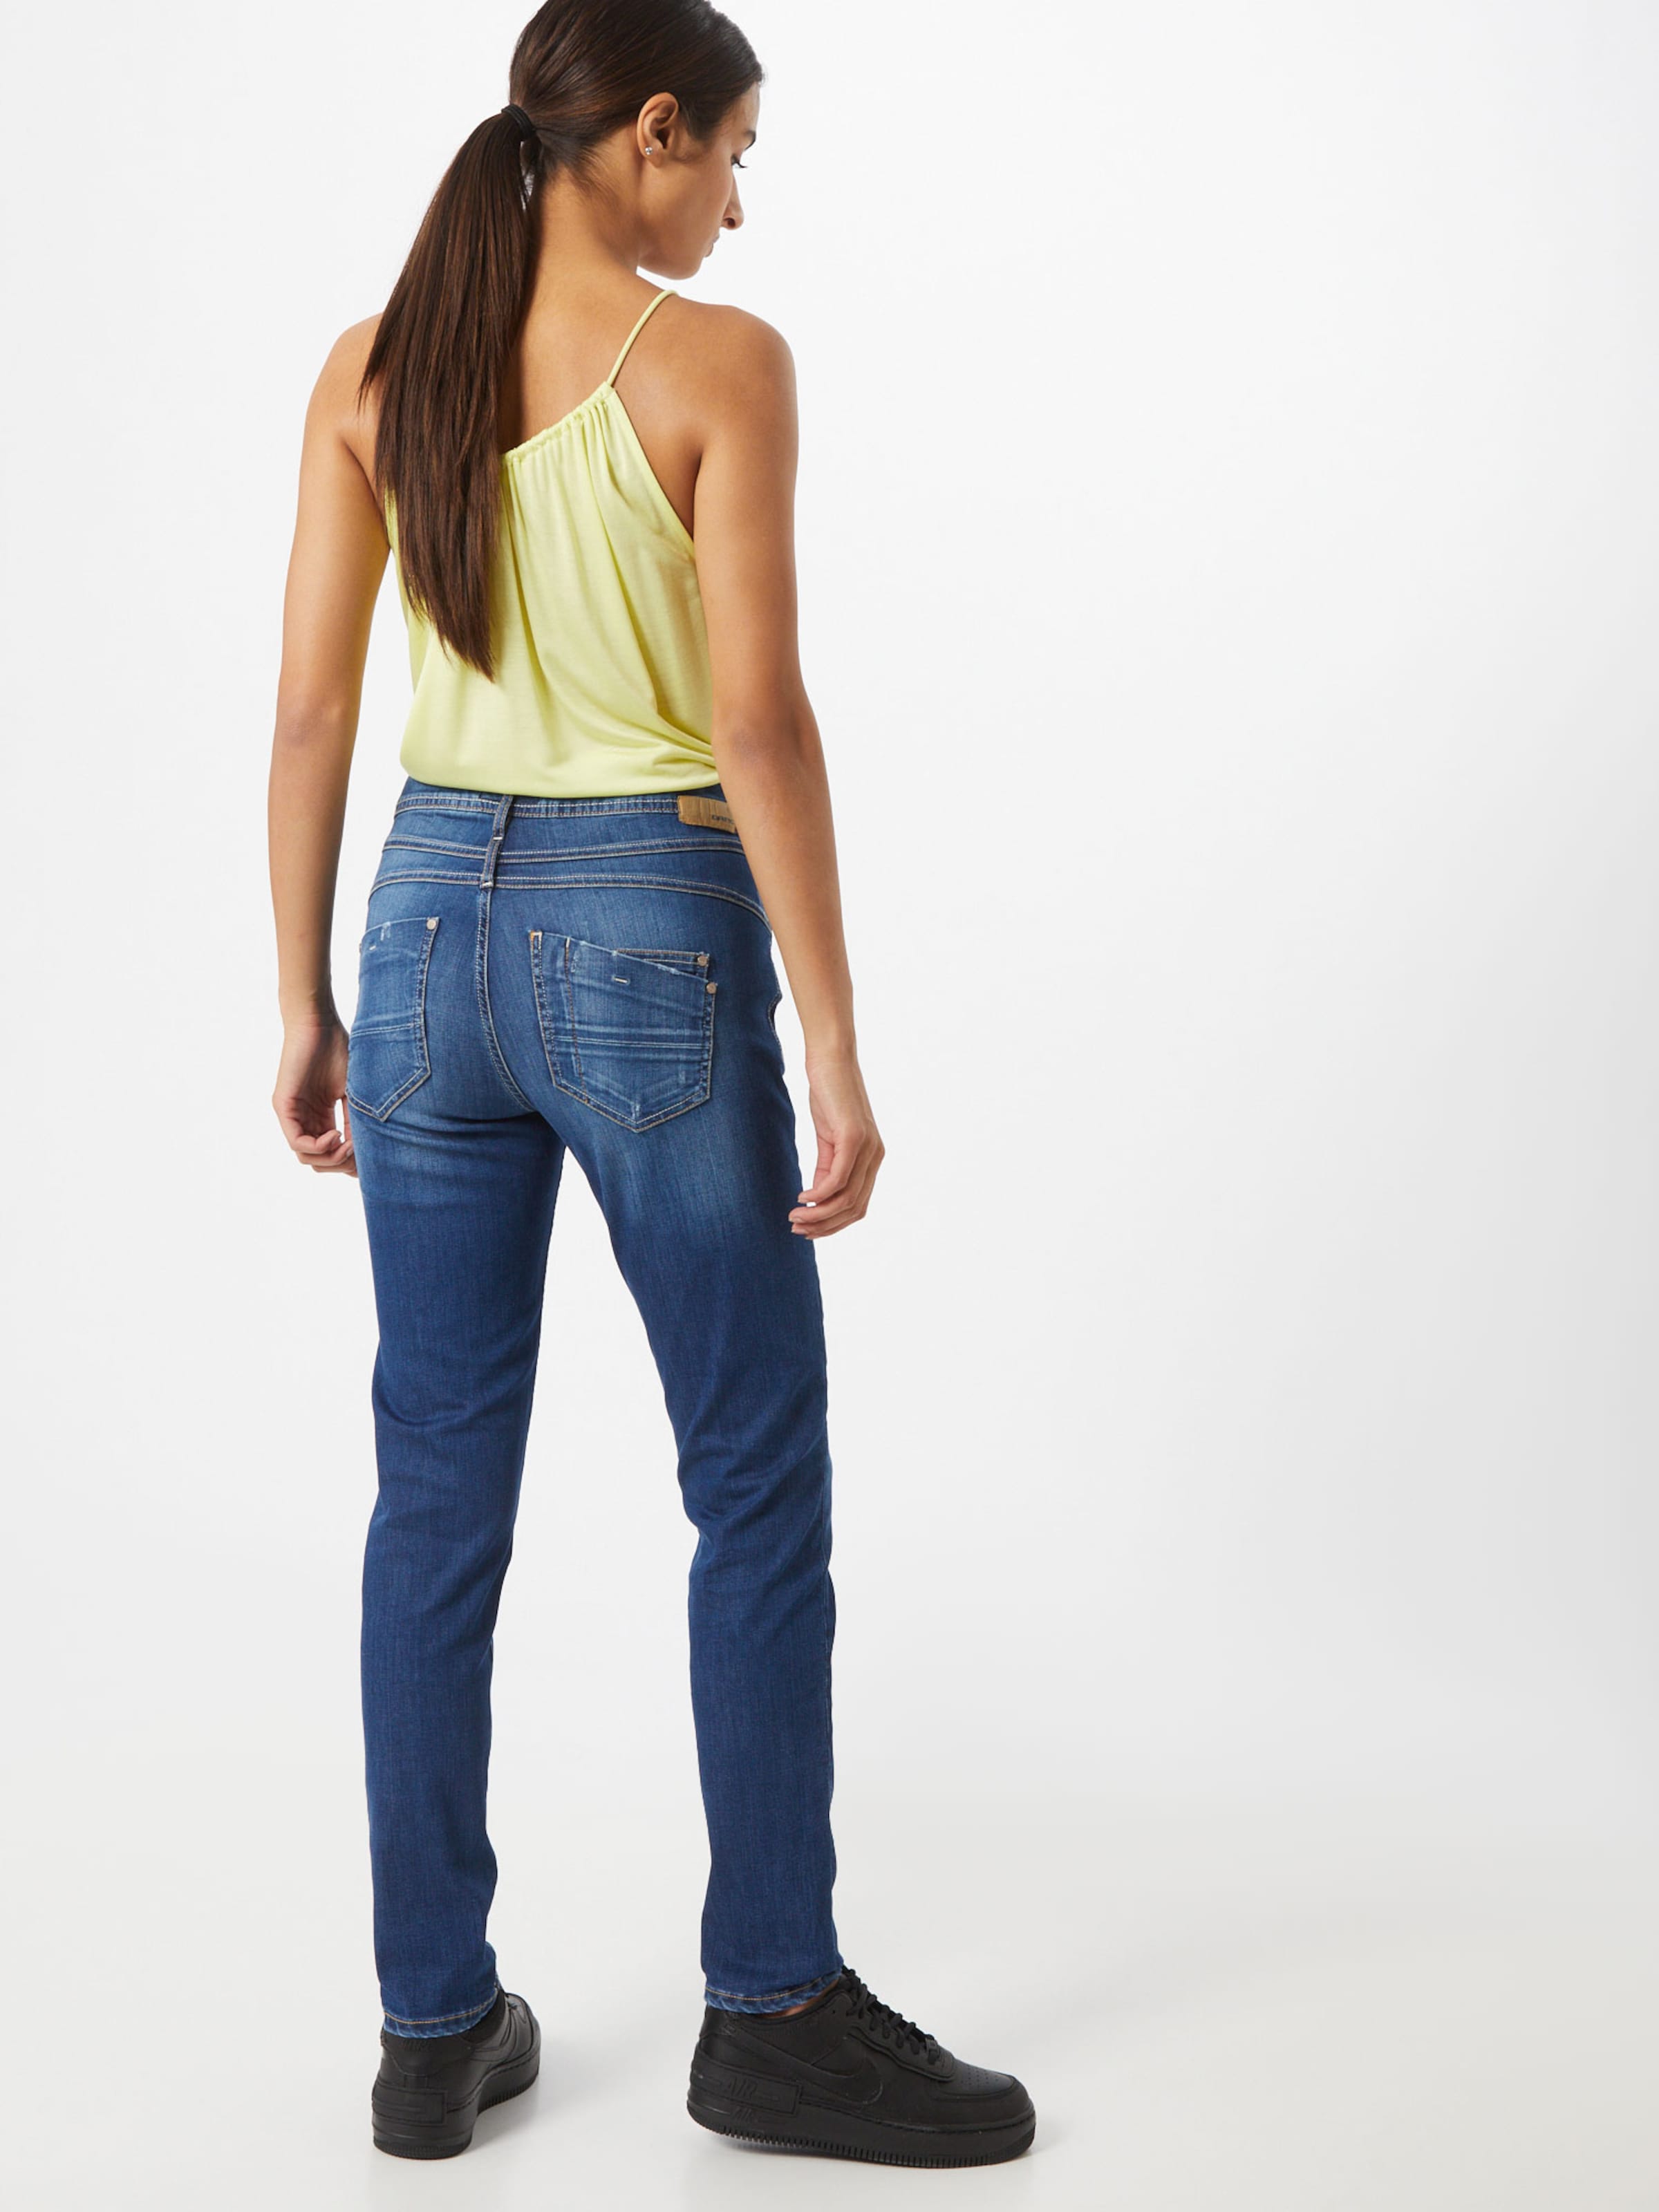 Jeans sOxmb Gang Jeans Amelie in Blu Scuro 